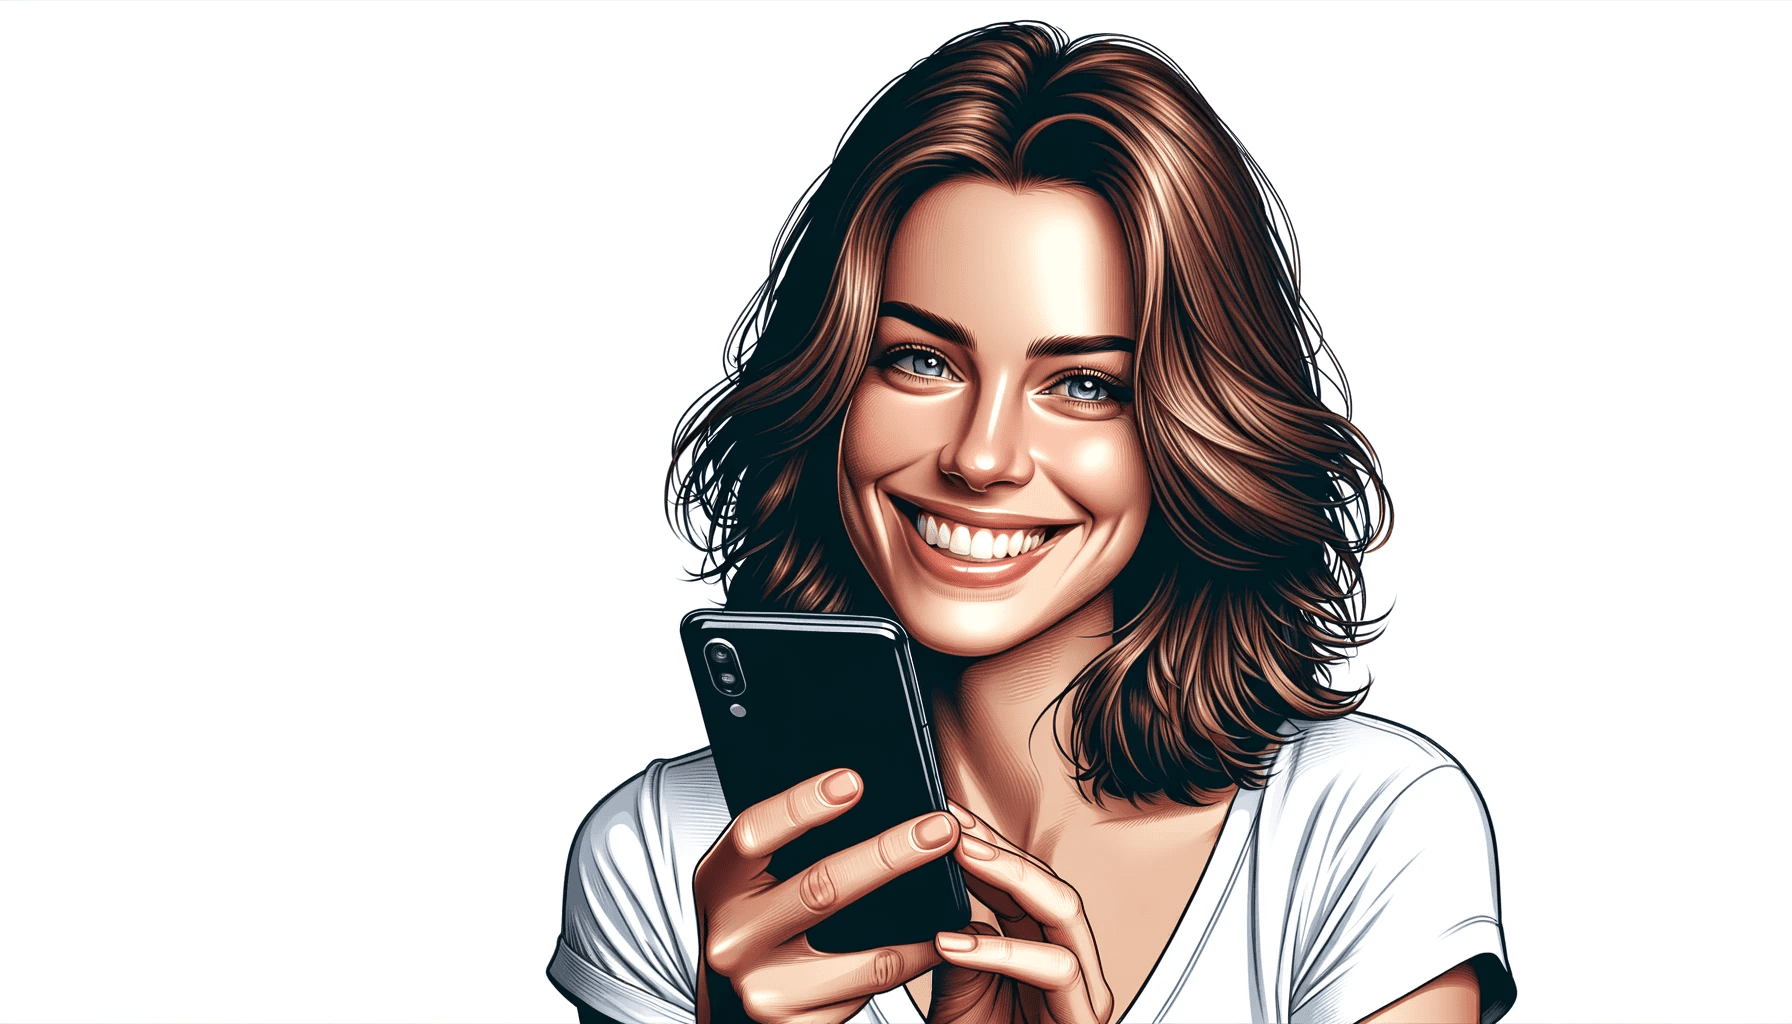 a smiling woman texting